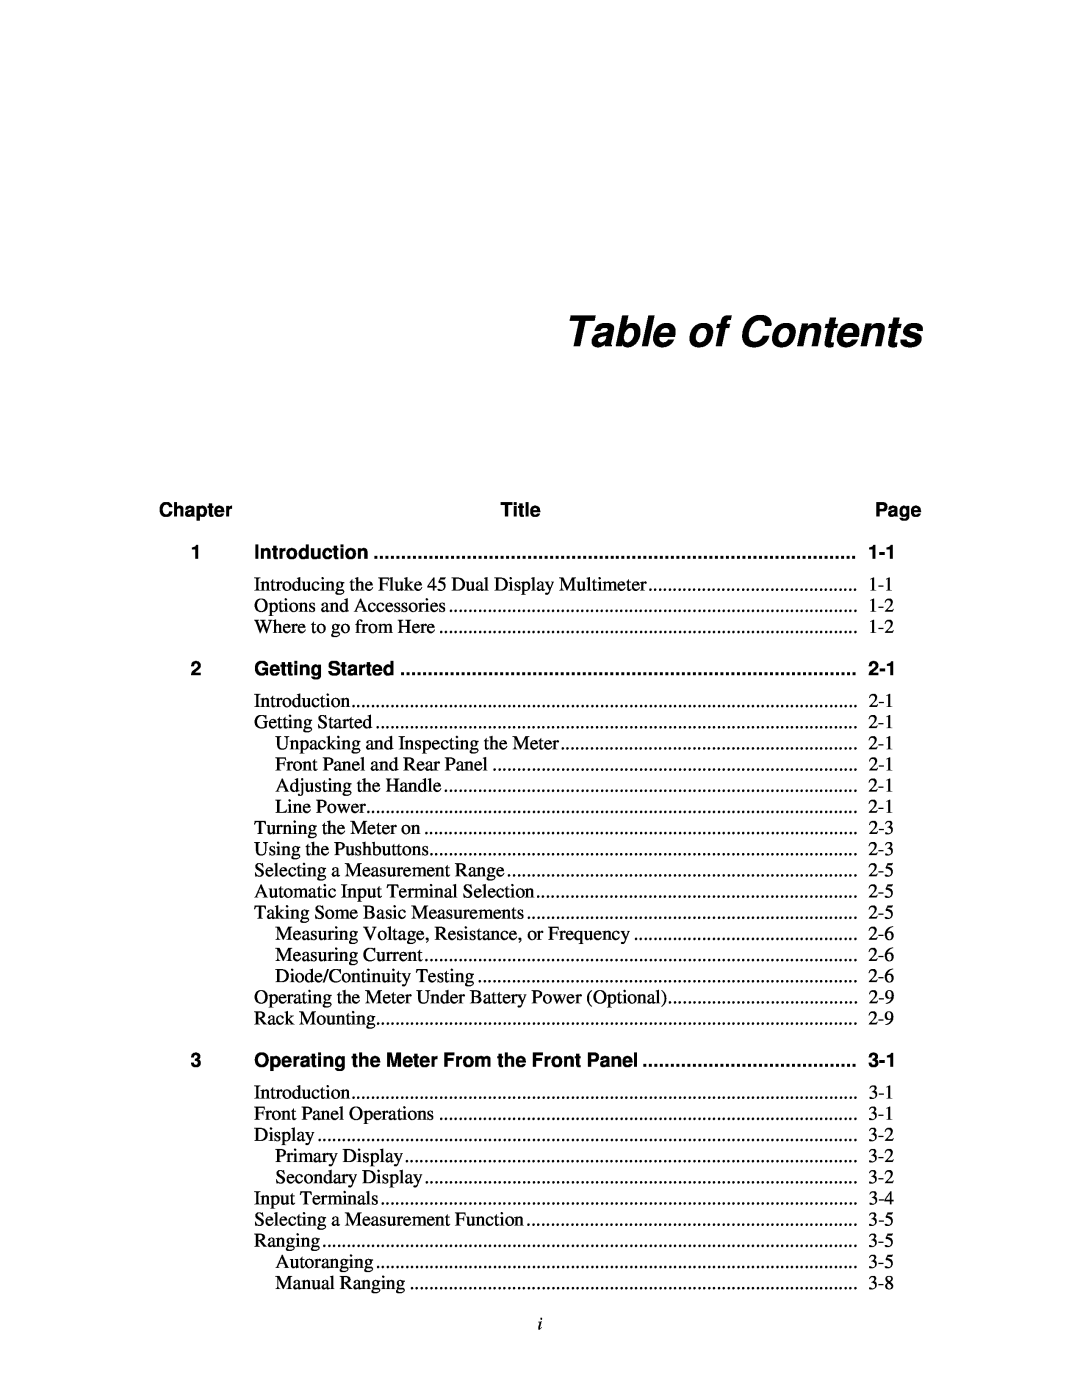 Fluke 45 user manual Table of Contents, Title, Introduction, Getting Started 